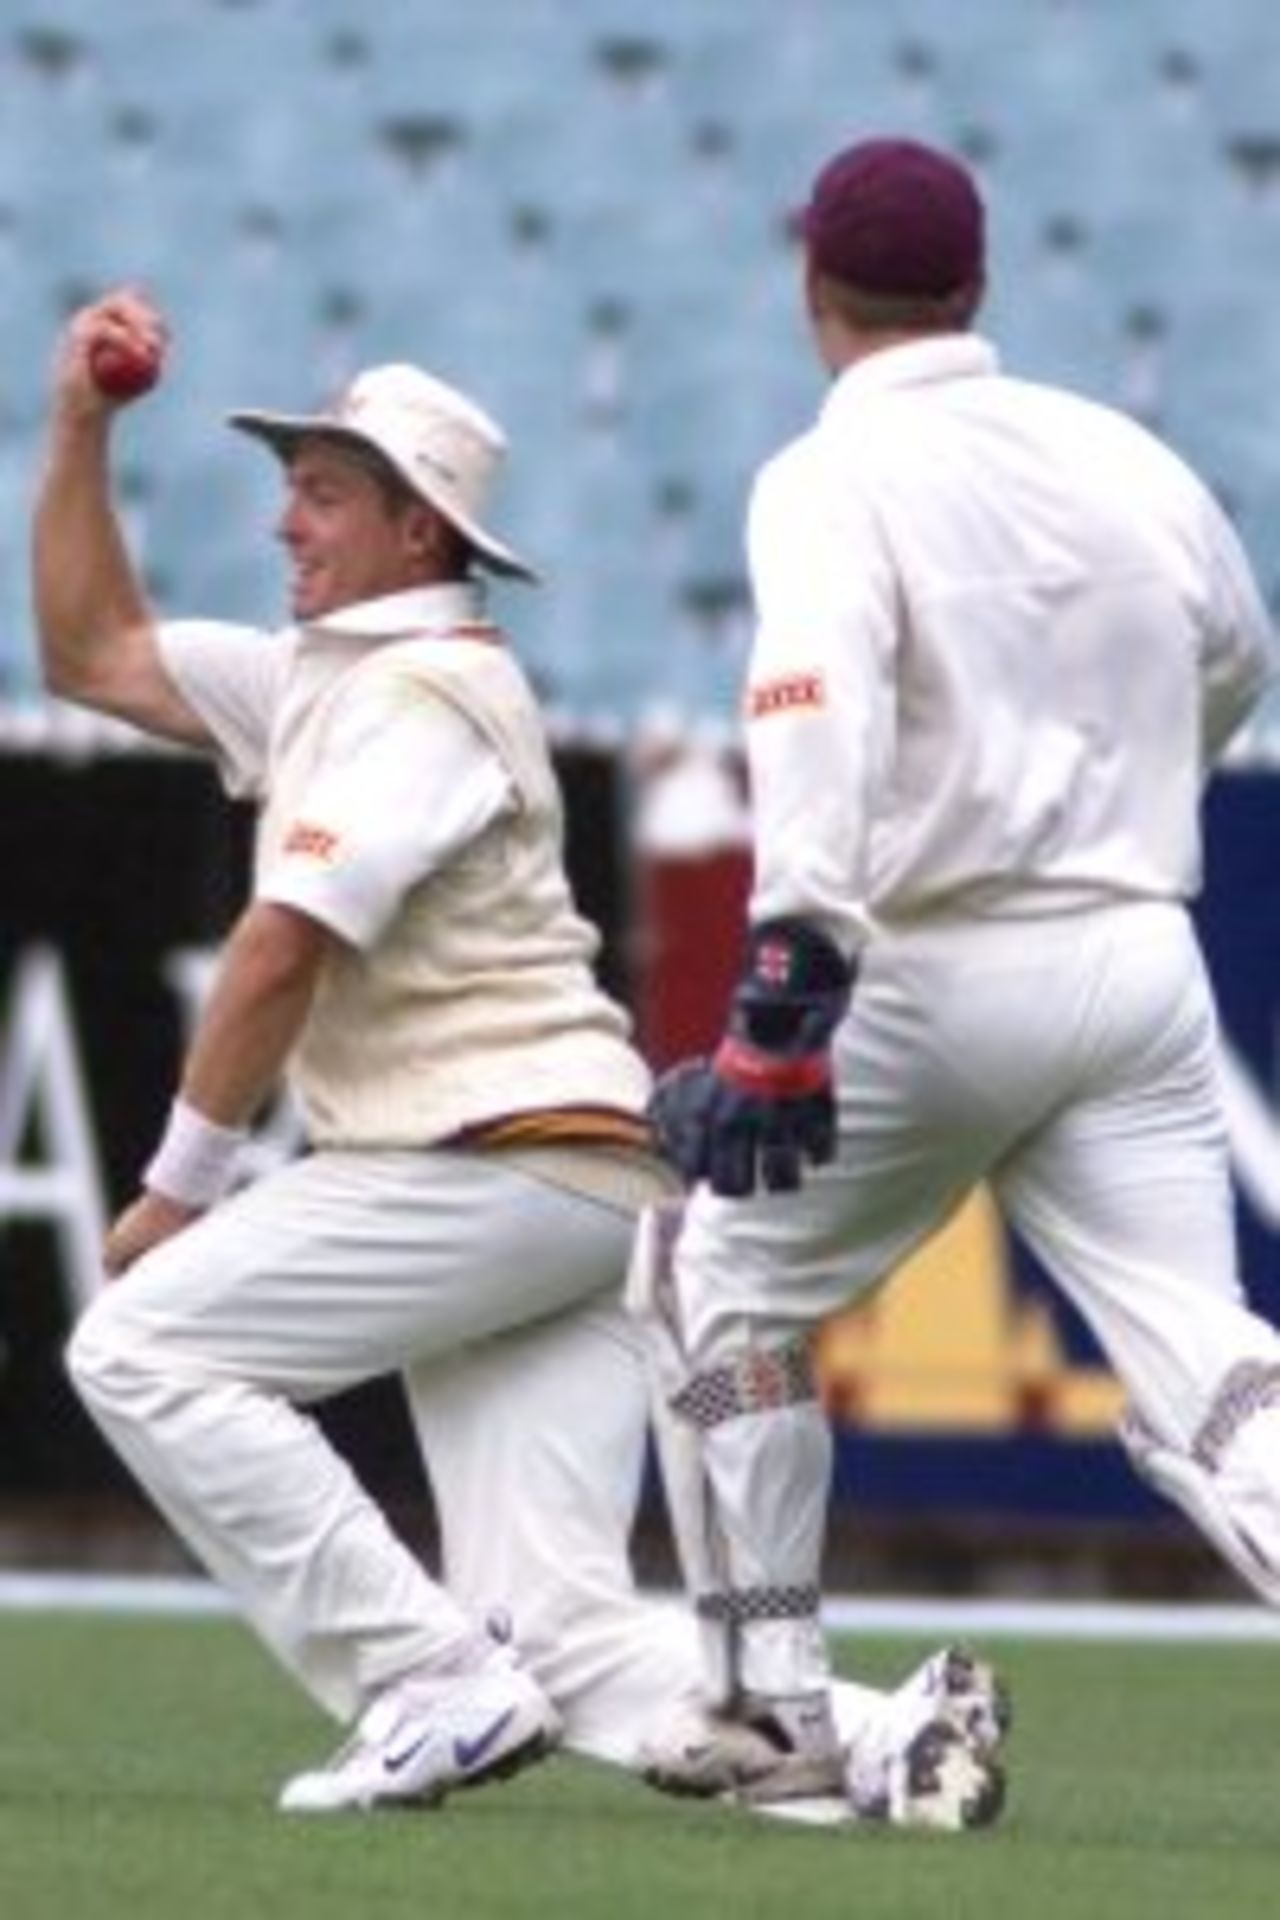 27 Jan 2000: Scott Muller of Queensland celebrates after his catch to dismiss Laurie Harper of Victoria off the bowling of Andy Bichel during the Pura Milk Cup match at the MCG in Melbourne, Australia.